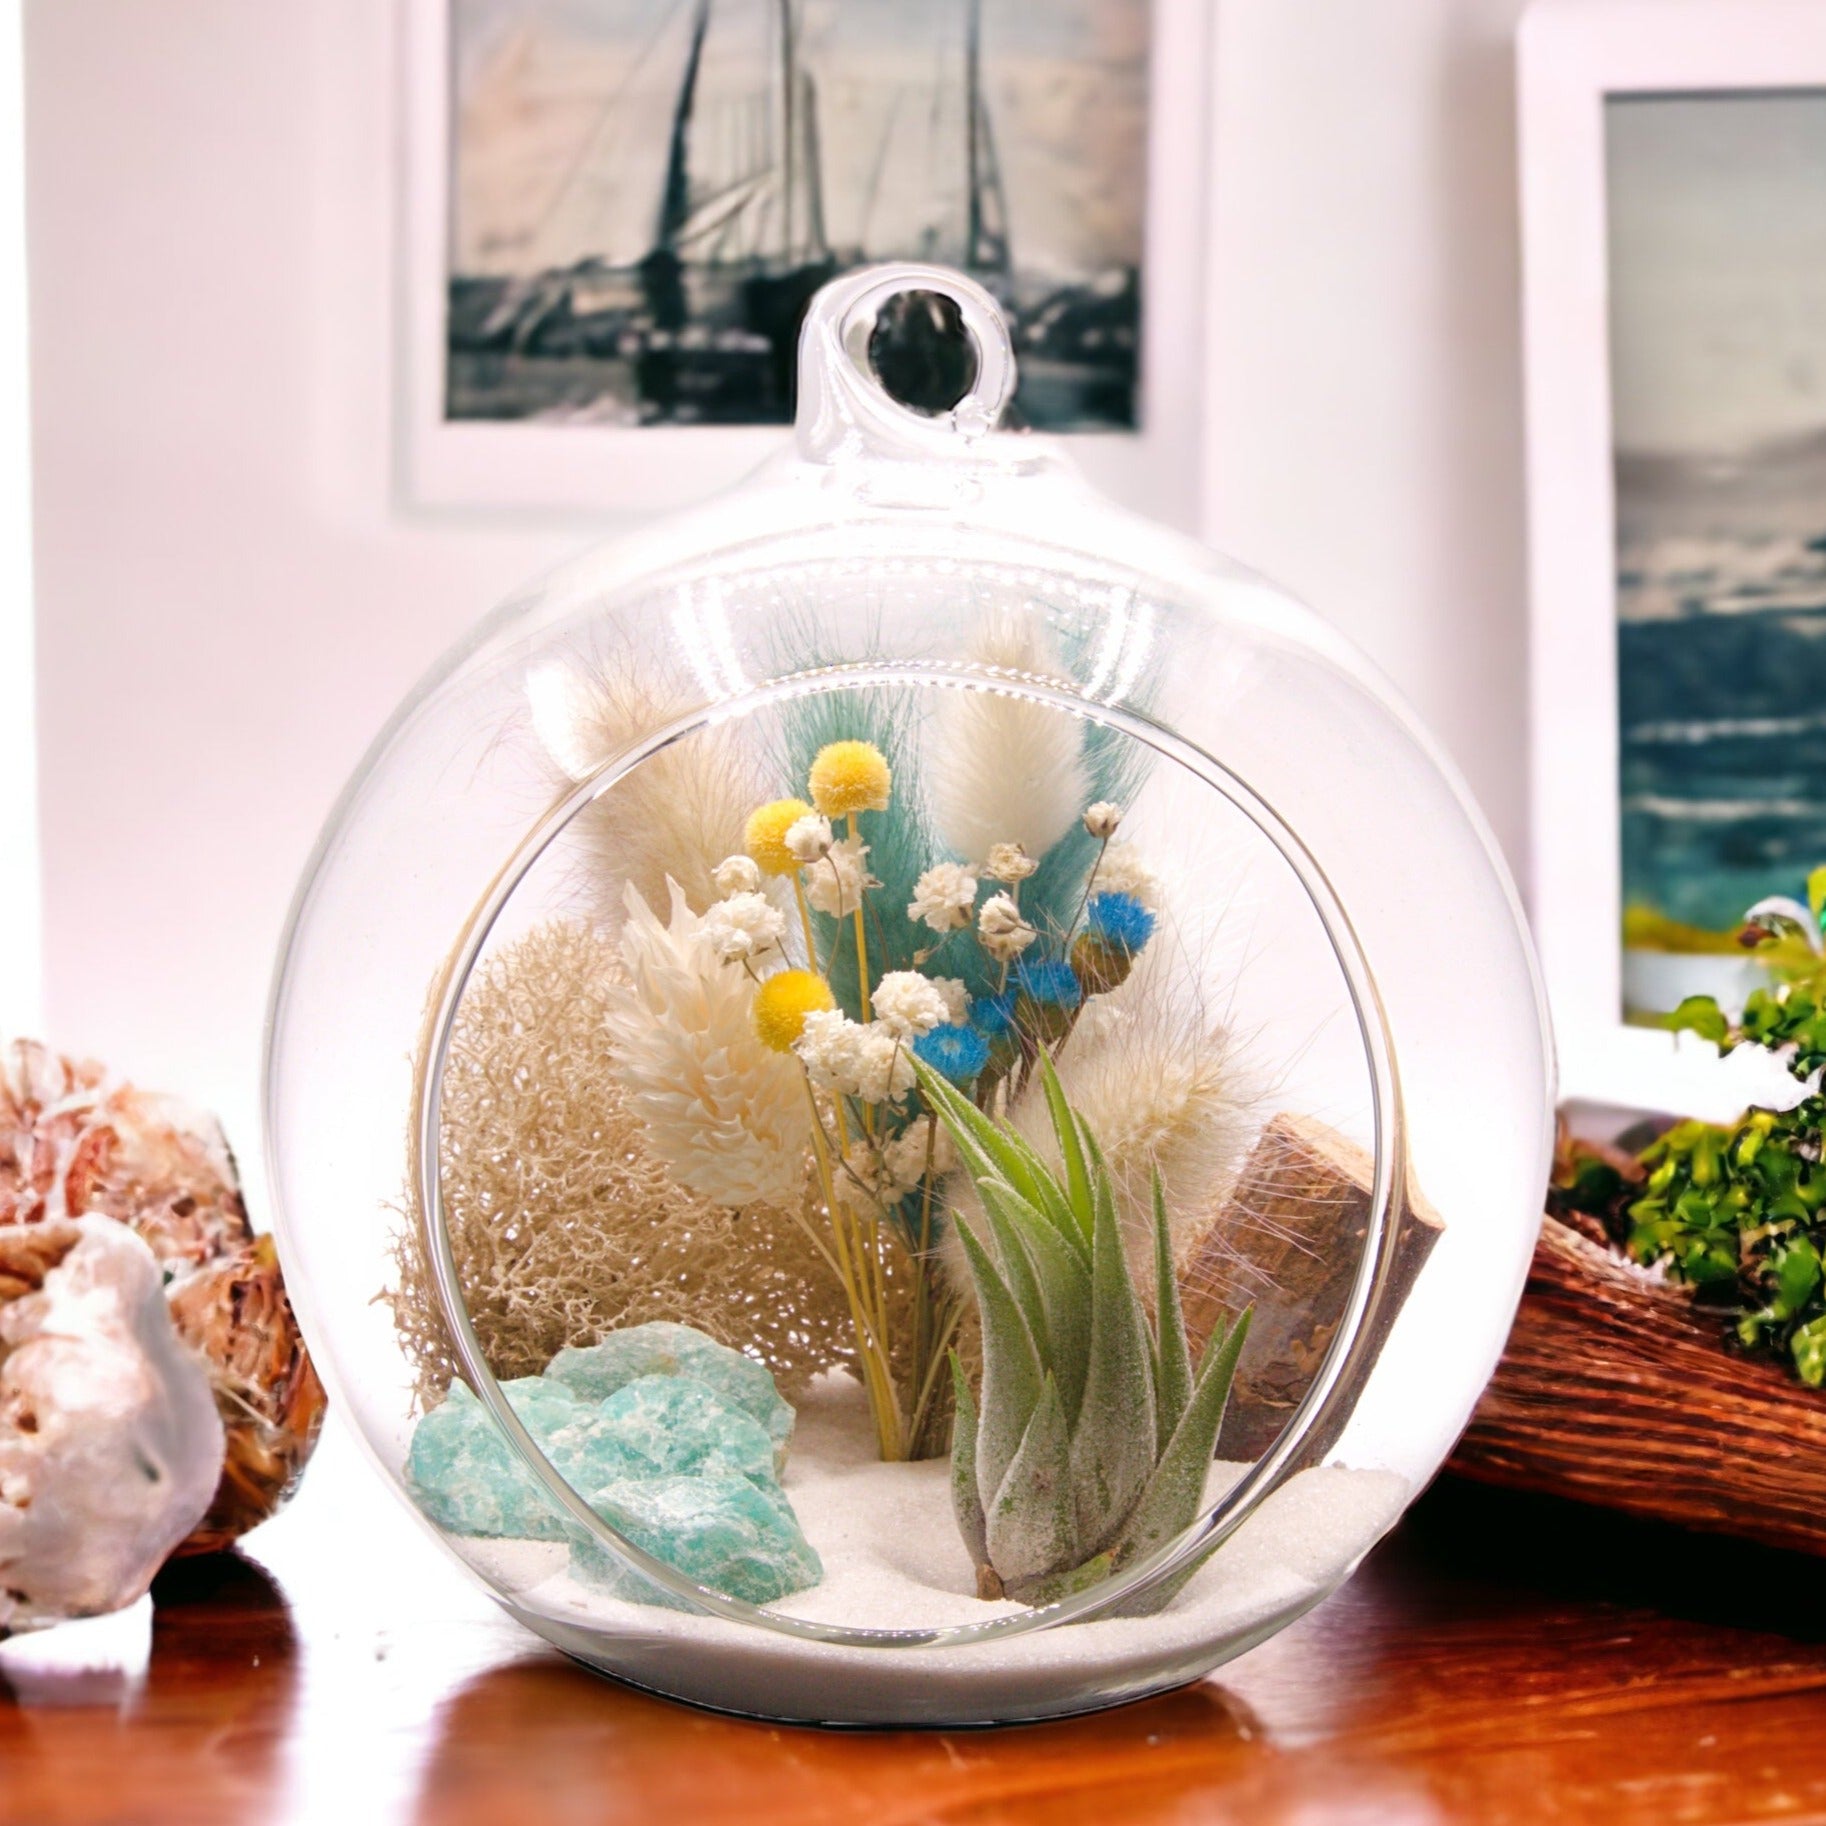 Glass bubble terrarium with an airplant, amazonite crystals and dried flowers